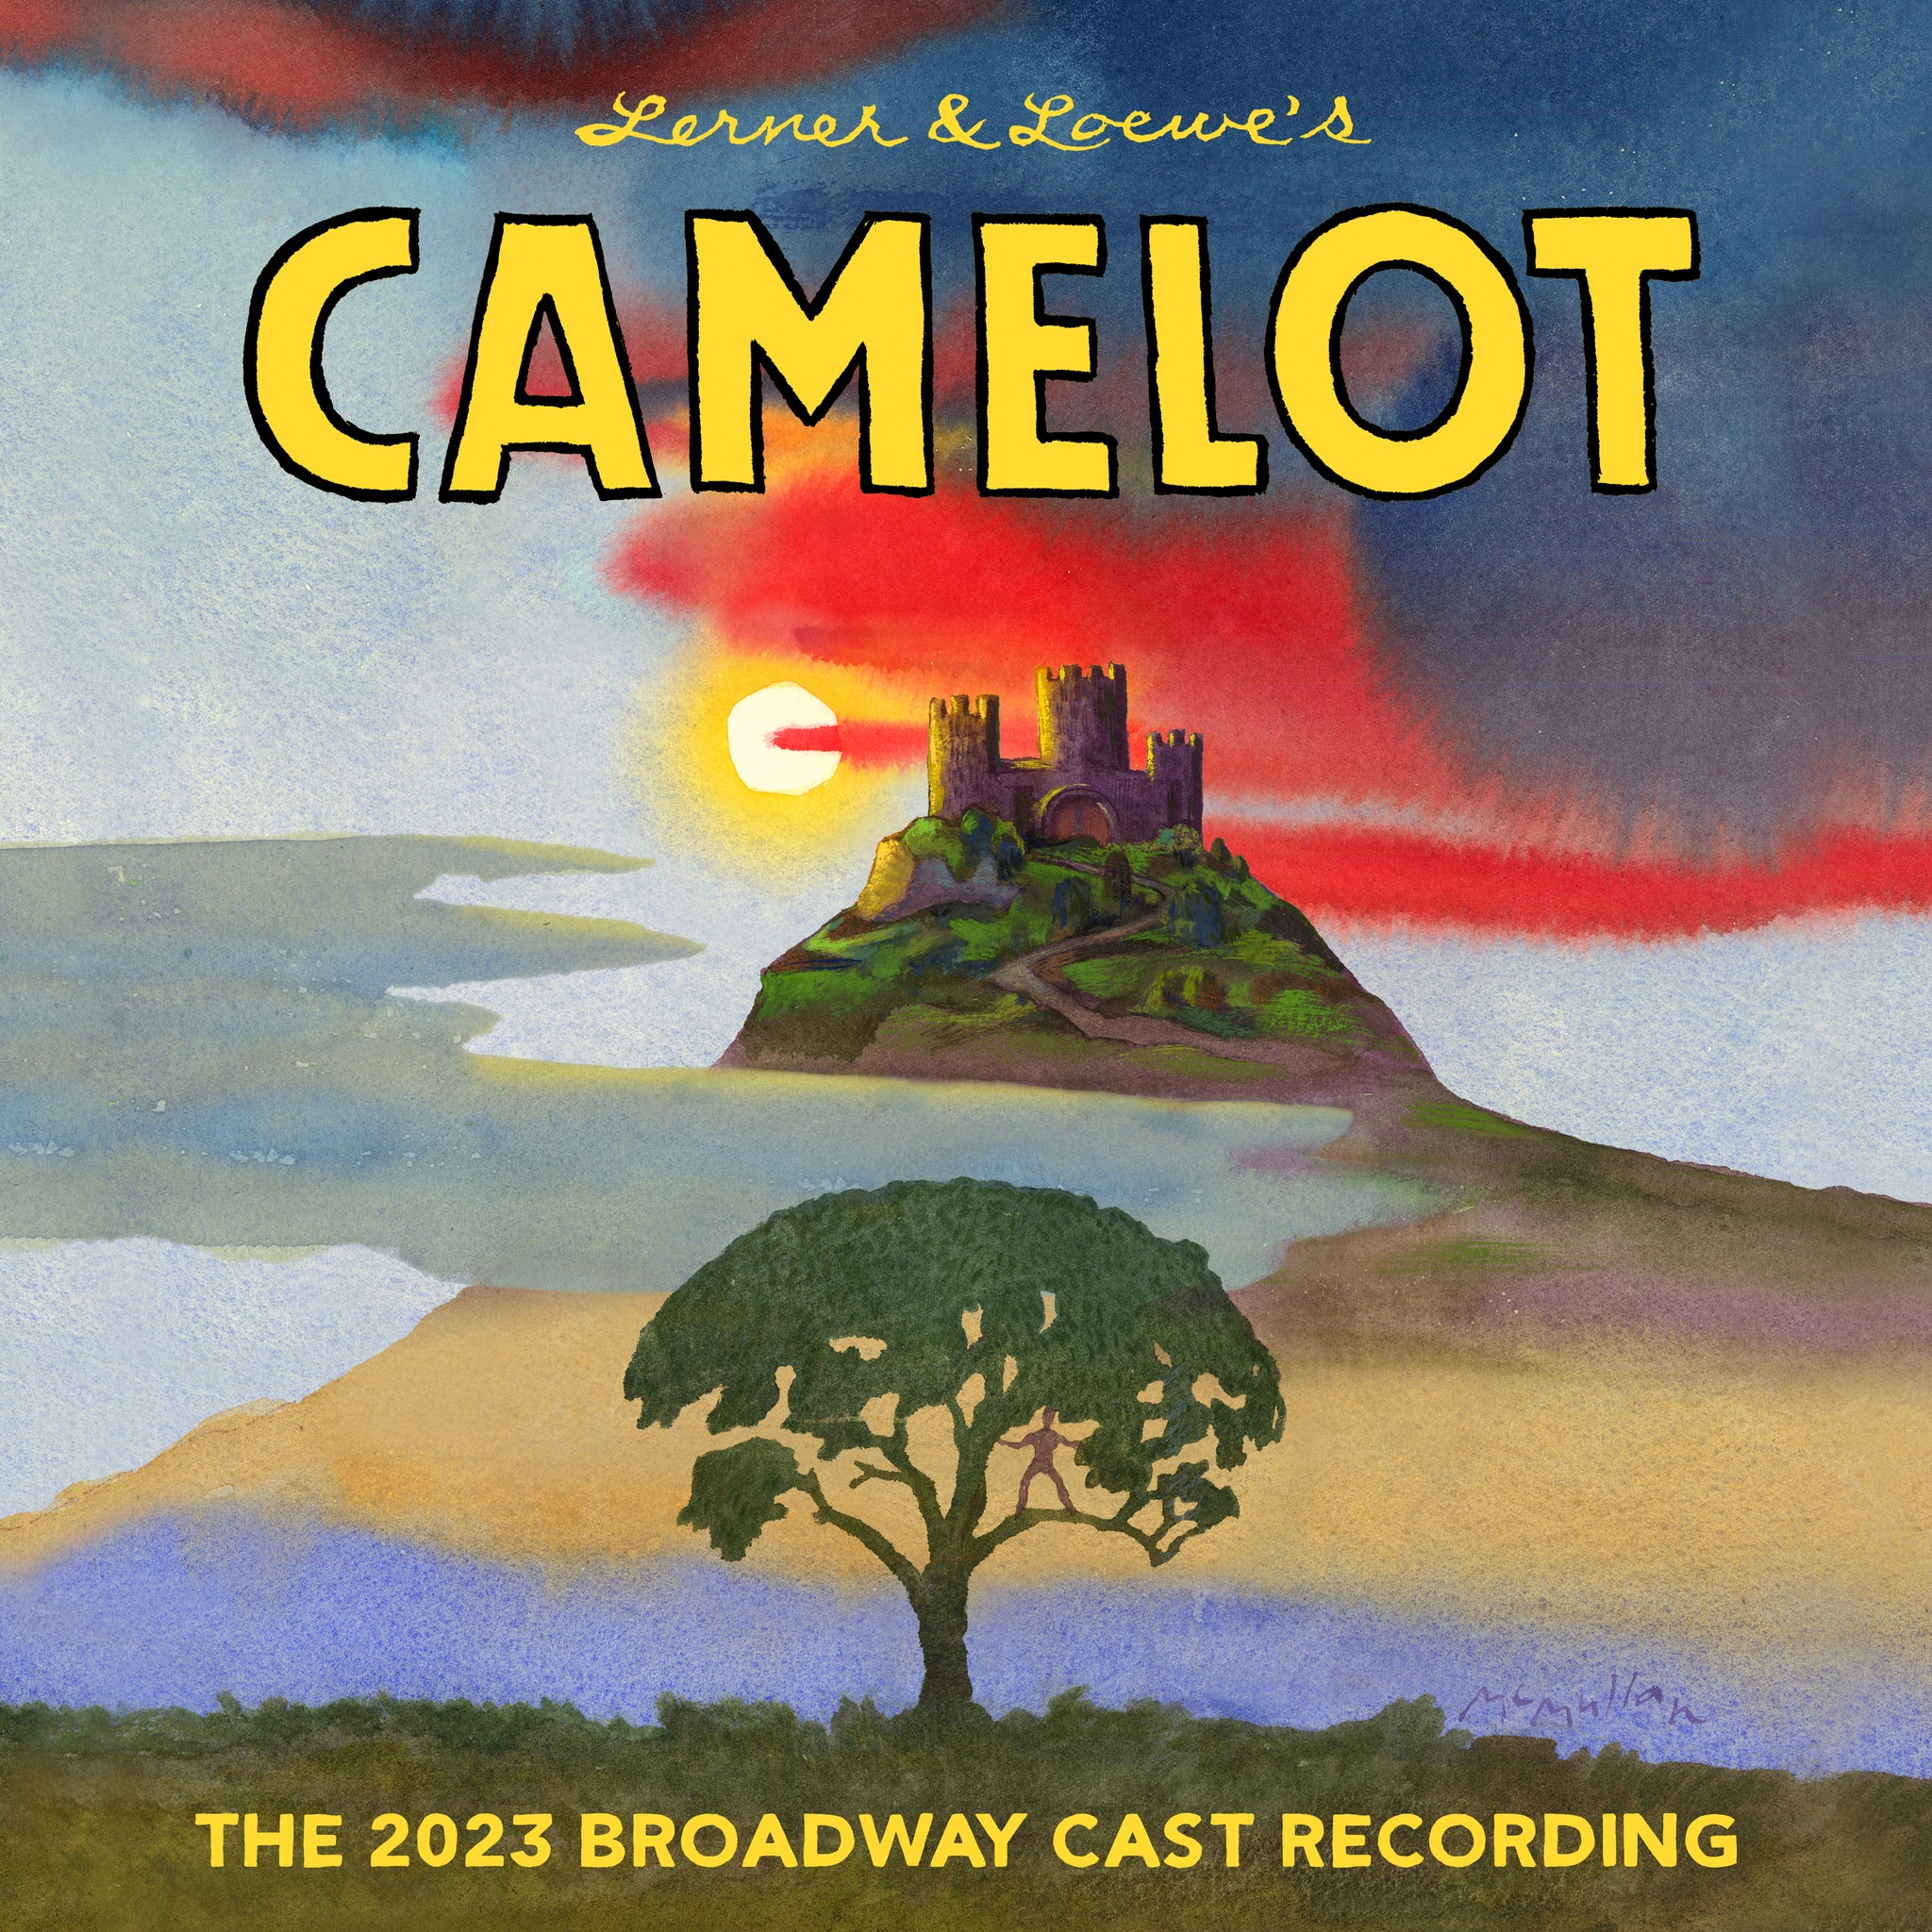 Camelot (The 2023 Broadway Cast Recording) [CD]